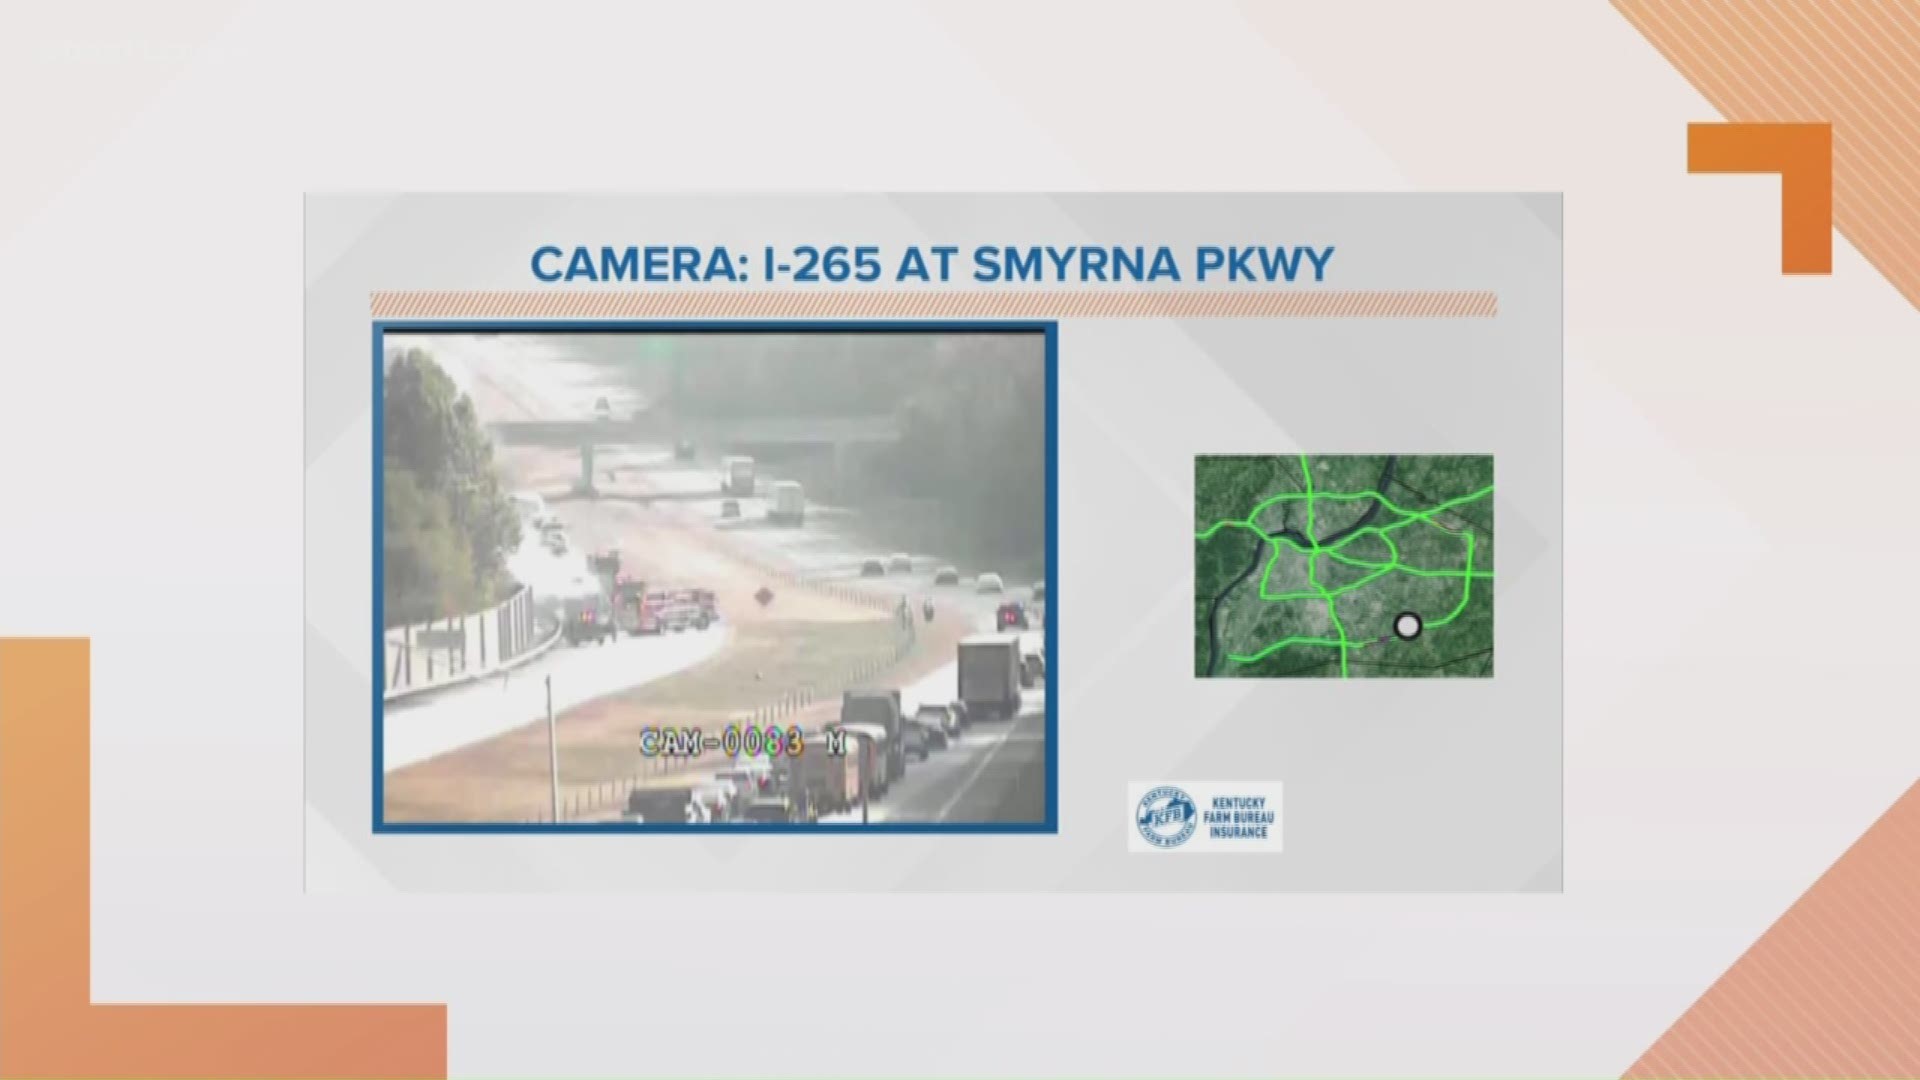 The truck caught fire Wednesday morning and has closed all lanes of the Gene Snyder near Smyrna Parkway for an 'unknown amount of time'.